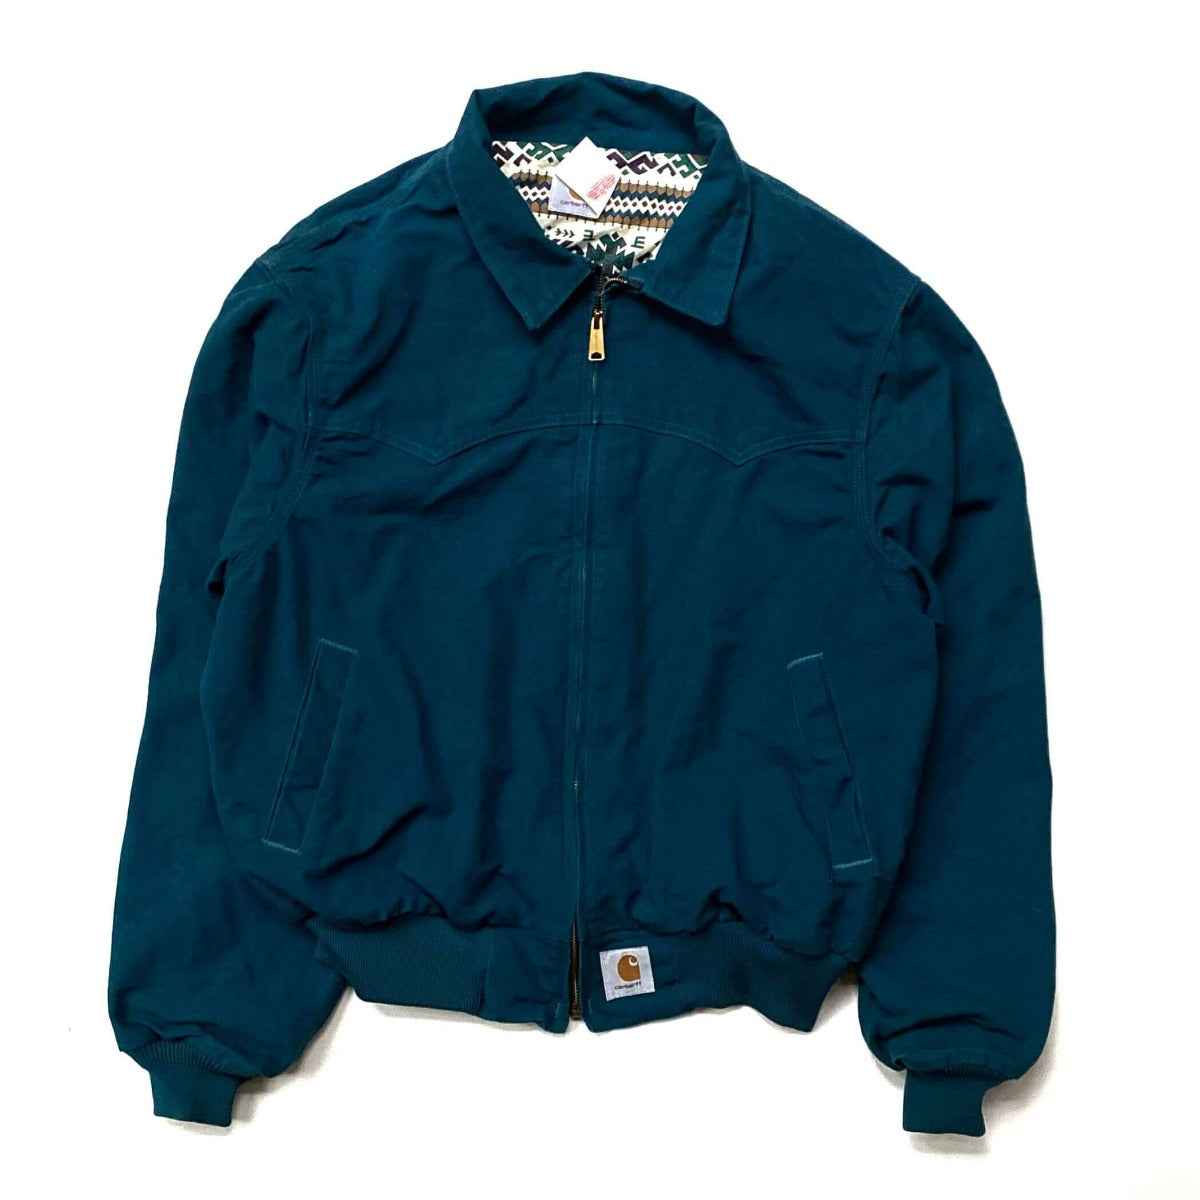 Shop The Thirty-First Co. Curated Carhartt Workwear Apparel